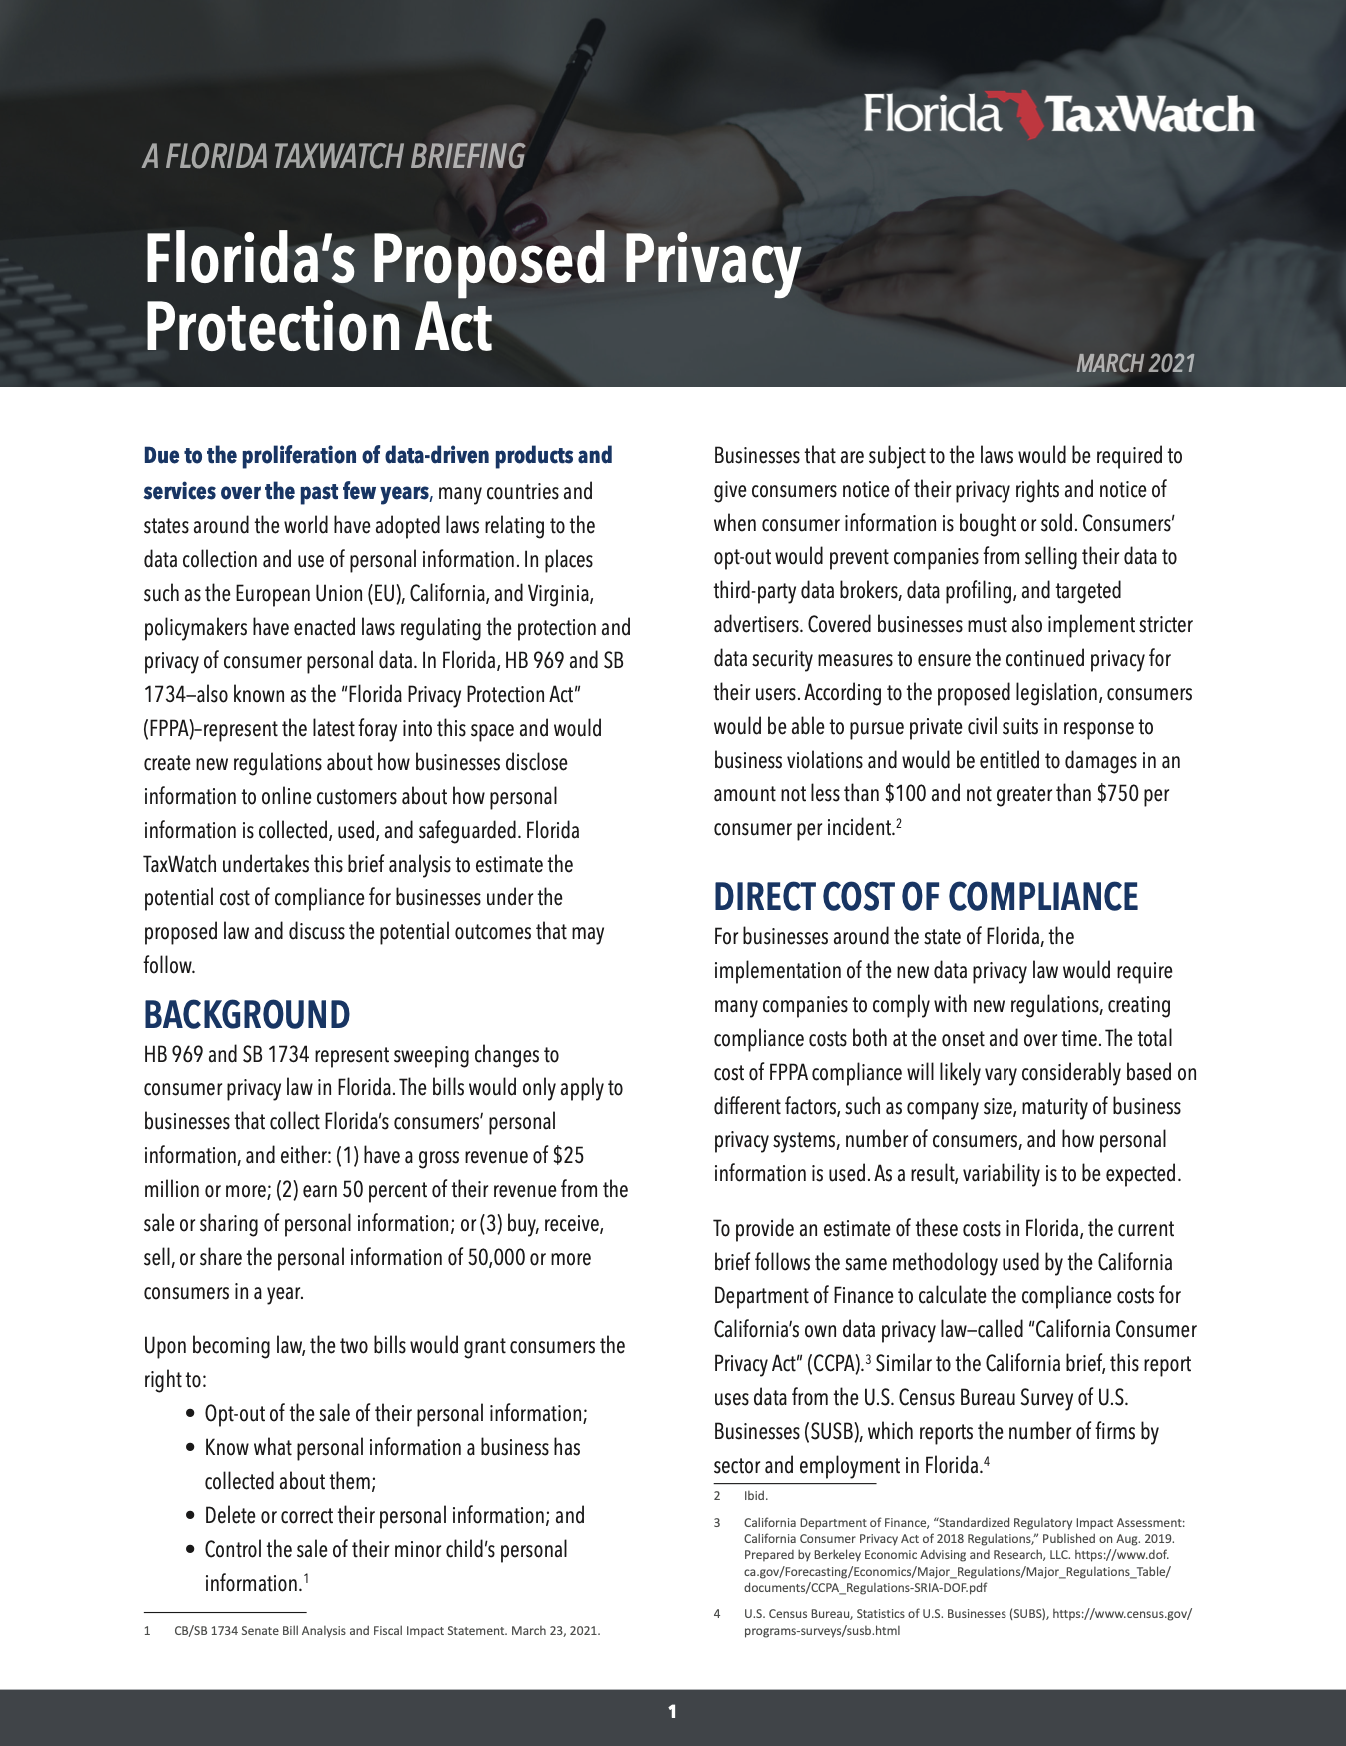 Florida’s Information Privacy Act